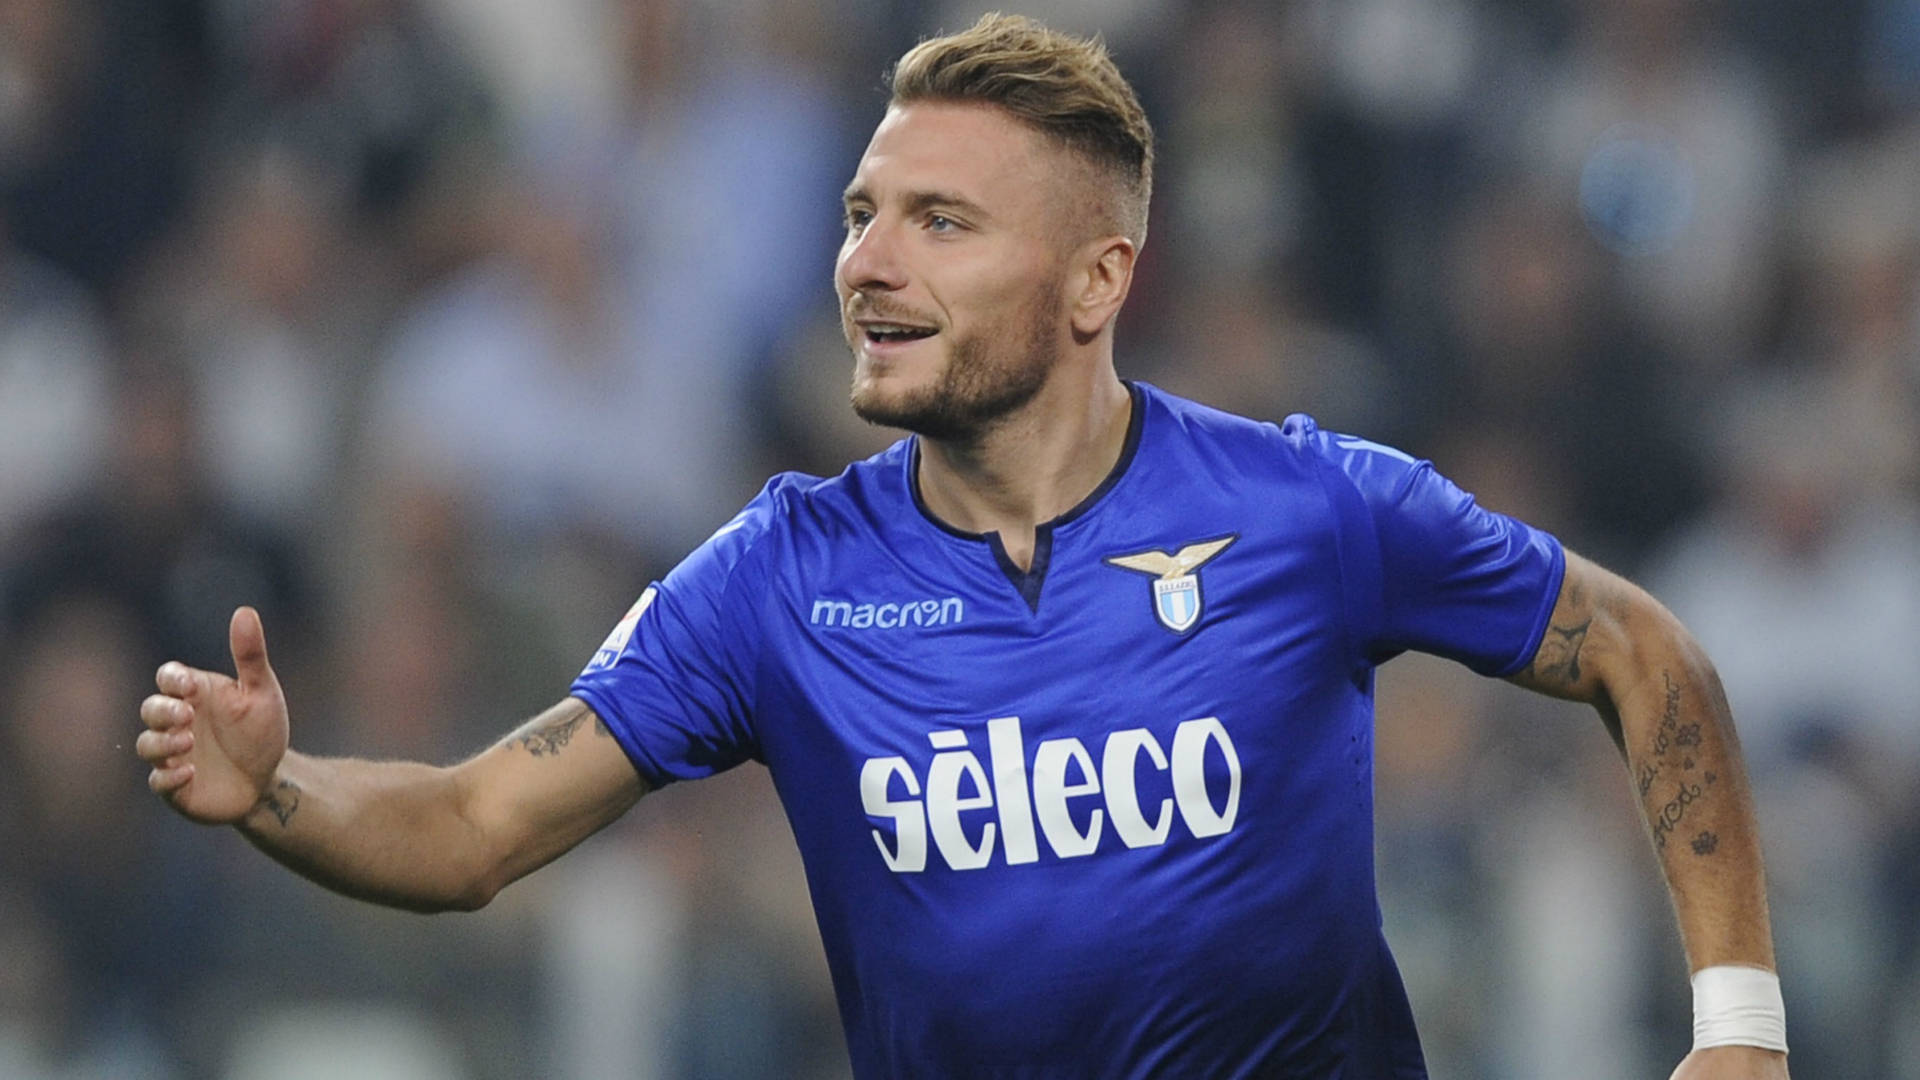 Ciro Immobile In Action On The Soccer Field Background